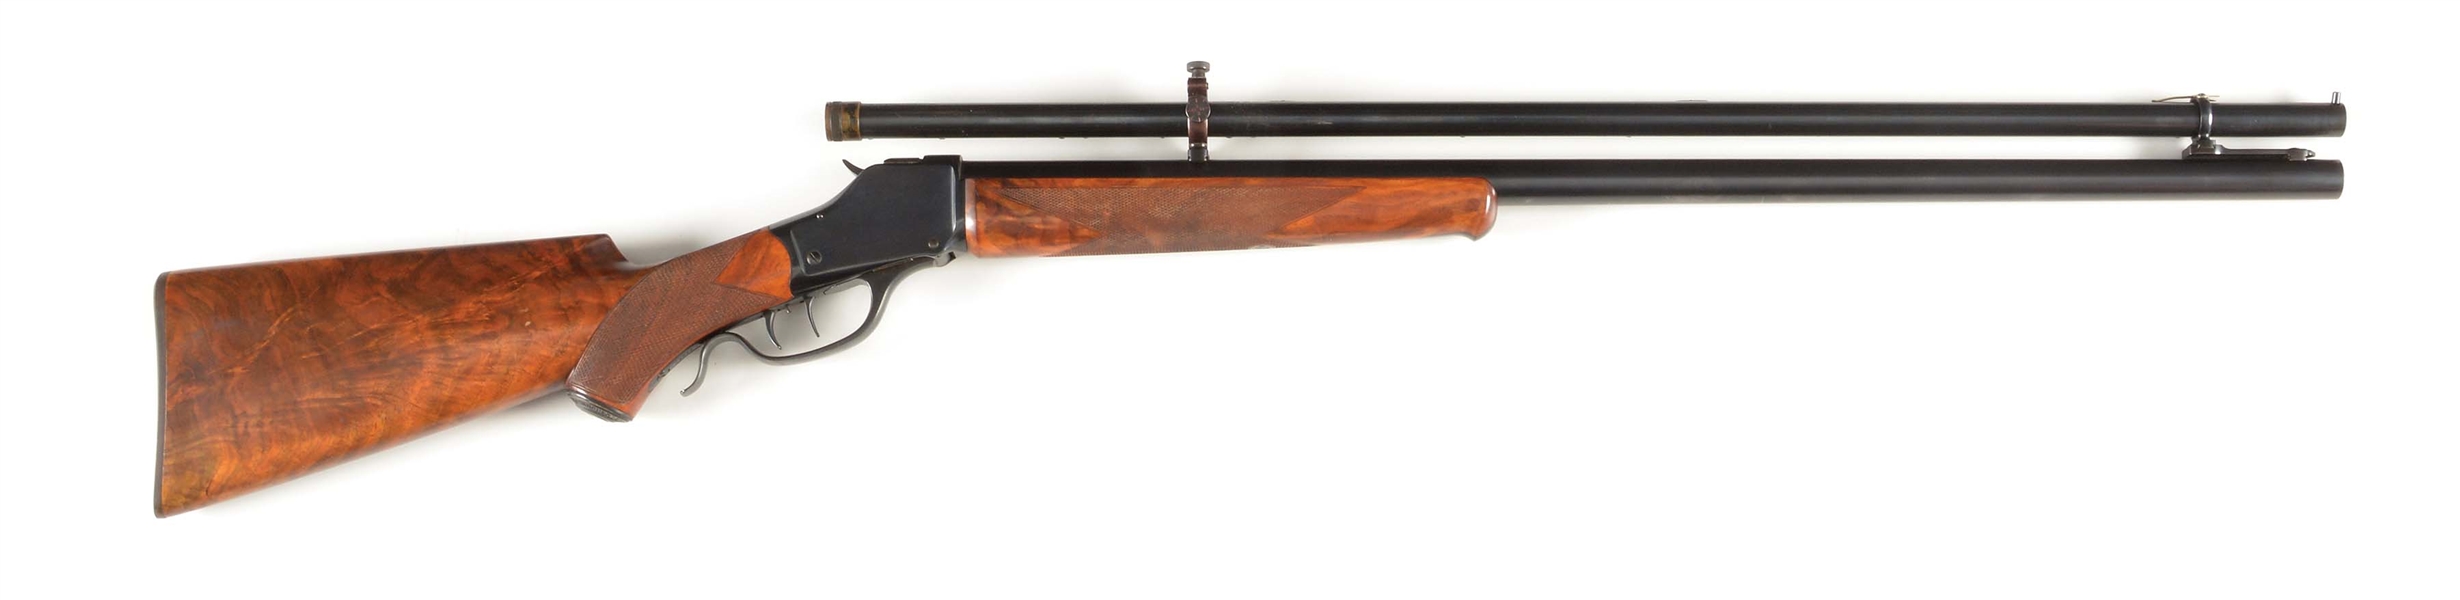 (A) WINCHESTER HI-WALL SINGLE SHOT RIFLE WITH SIDLE LONG TUBE SCOPE.